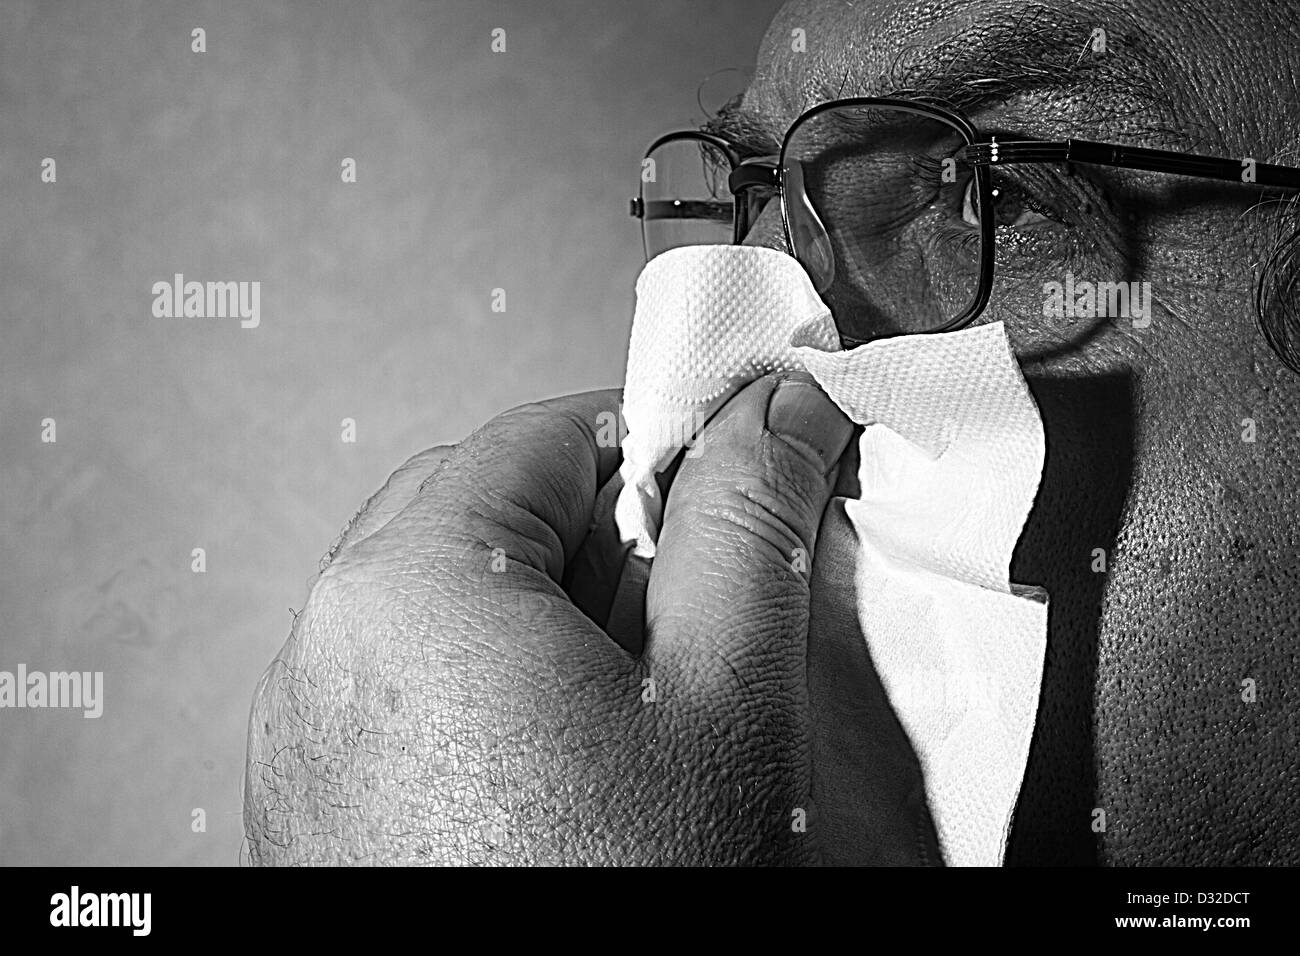 middle-aged man blowing his nose into a tissue, black and white Stock Photo